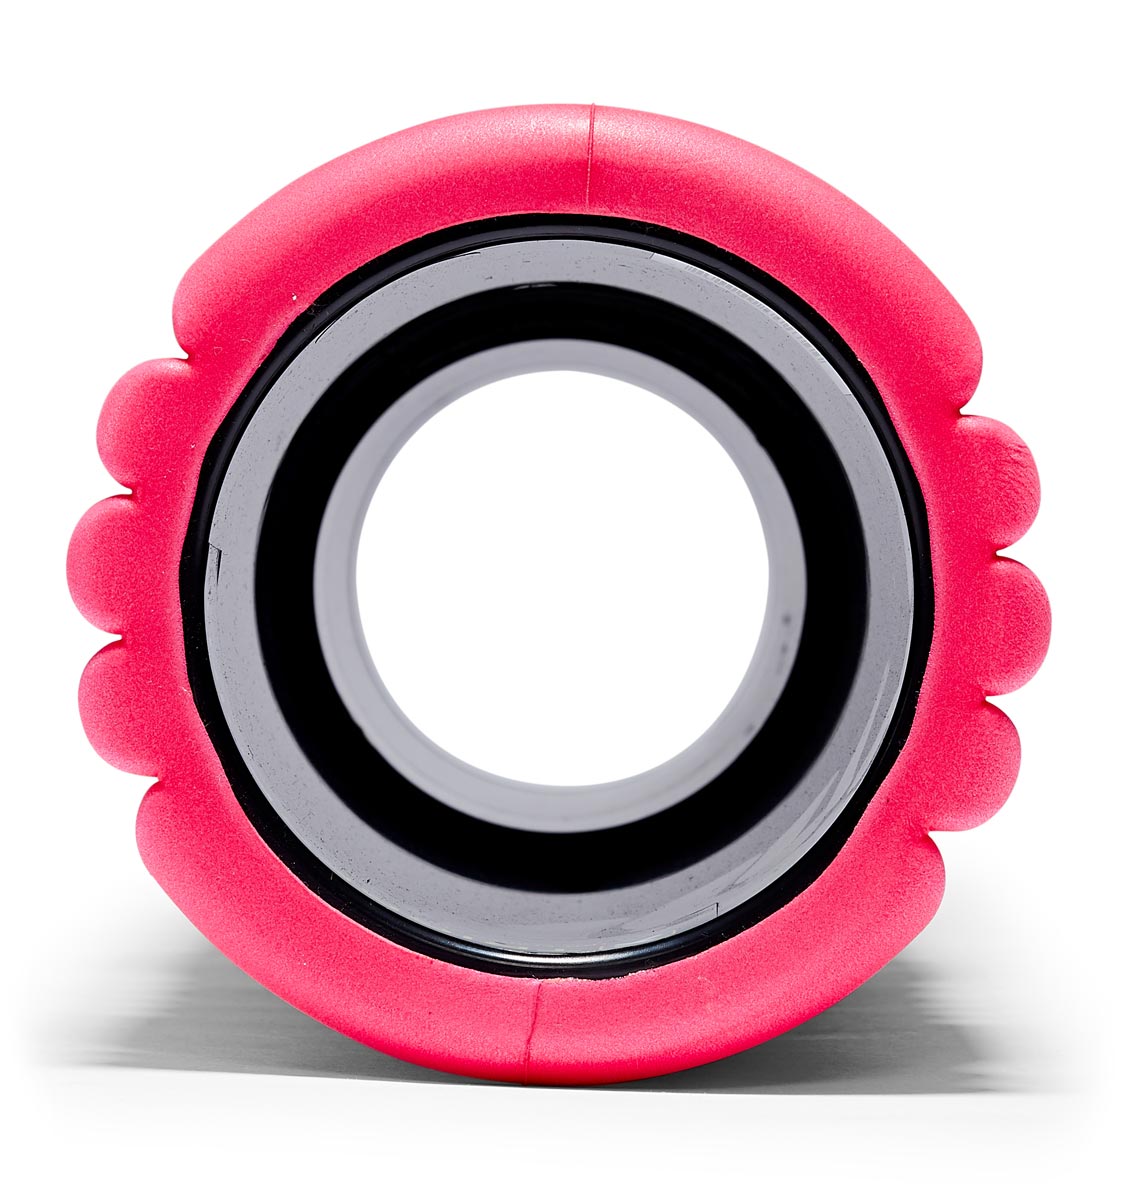 TPT3GRD2PWS0000 TriggerPoint The Grid 2.0 Foam Roller Pink - Circle Face